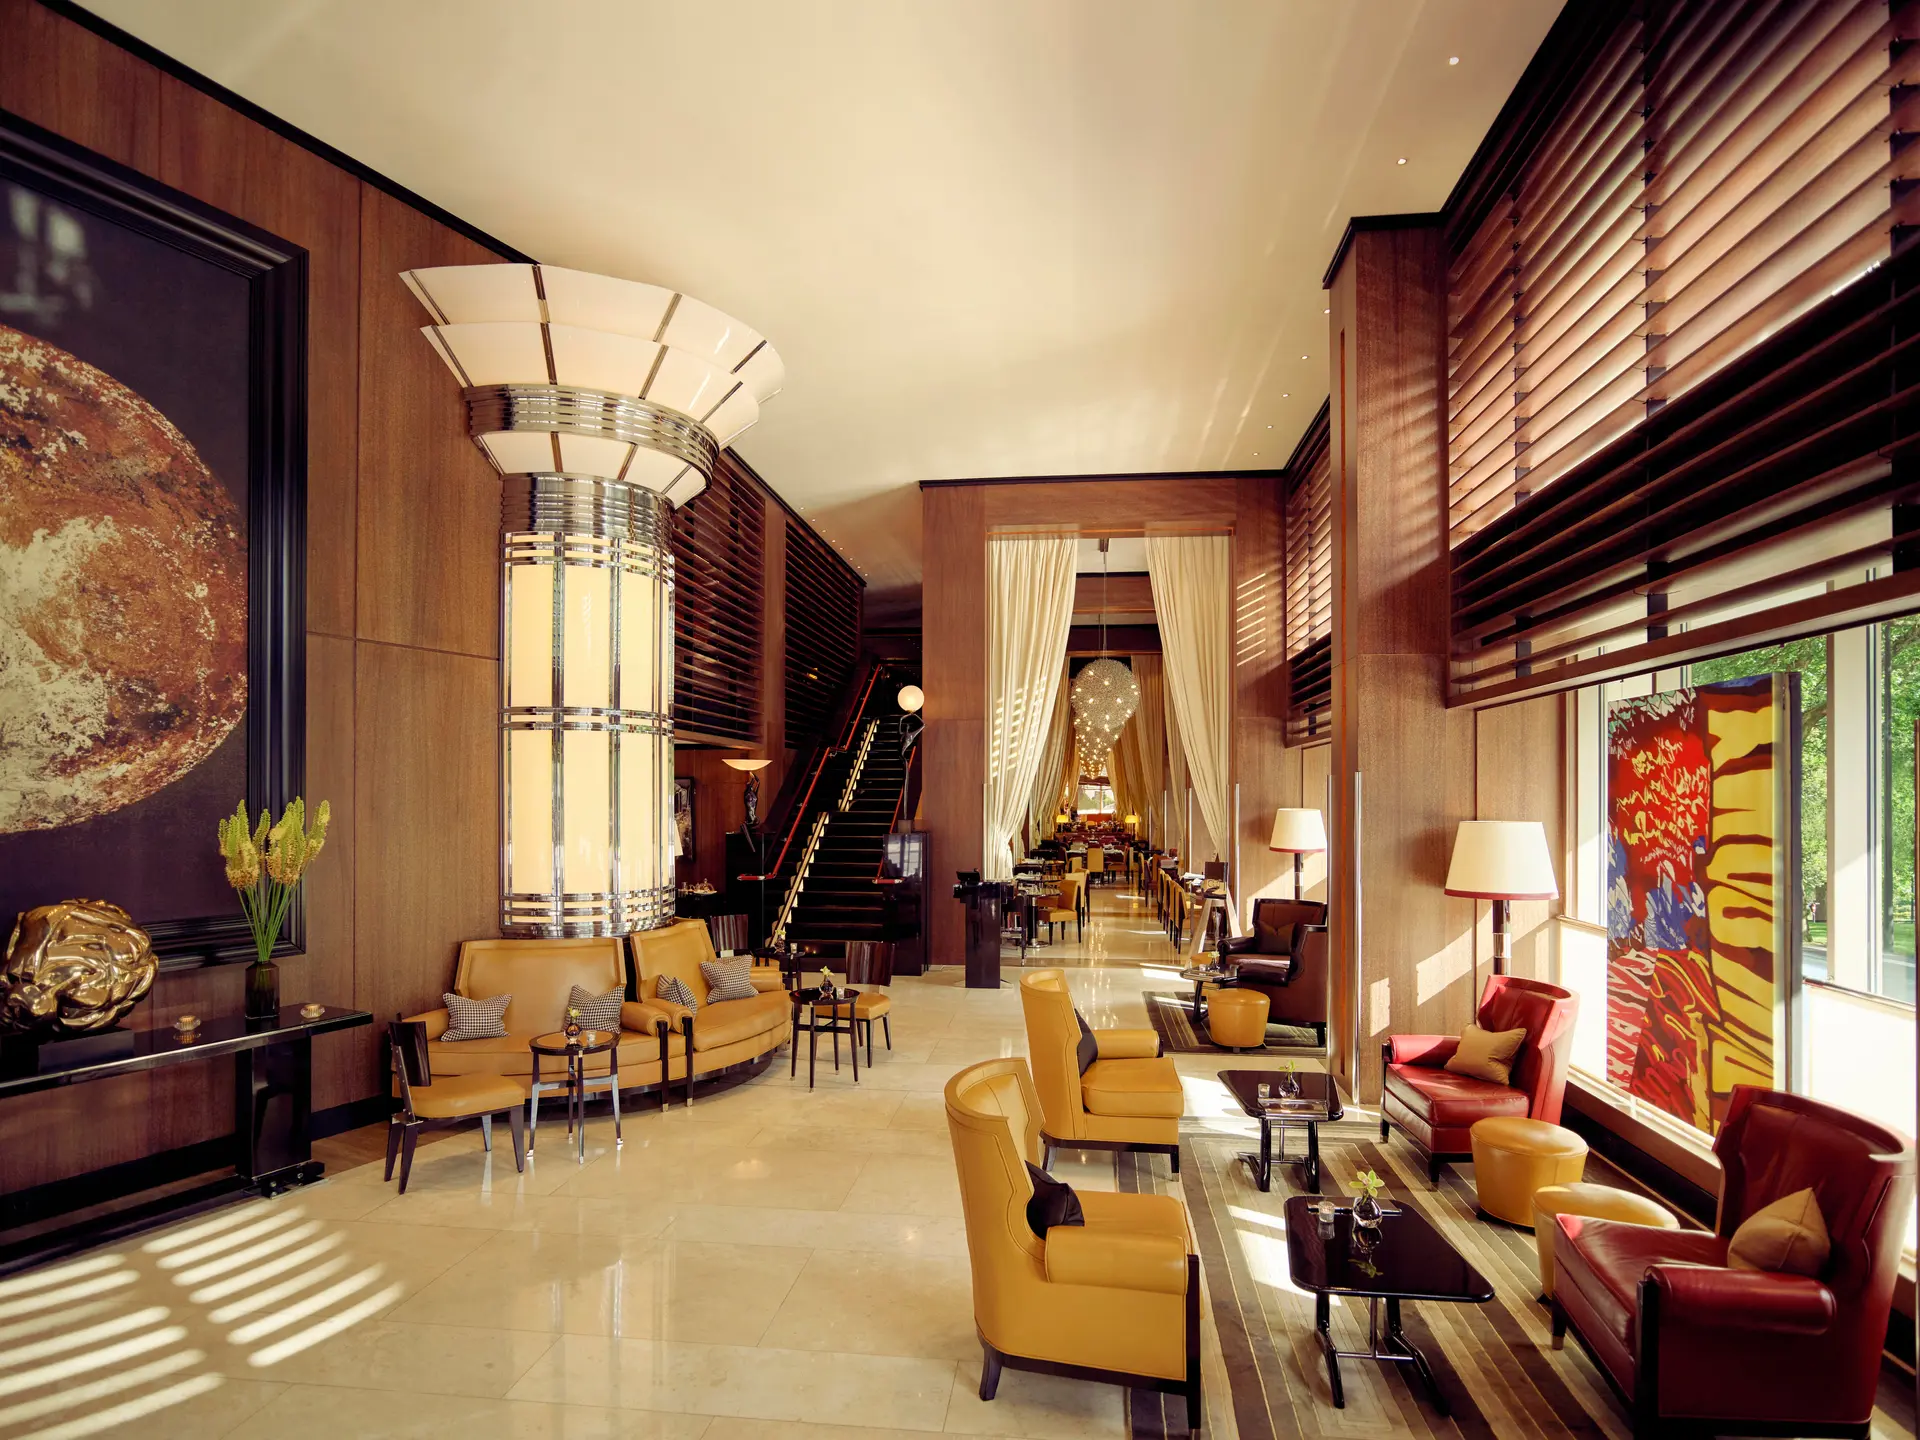 Hotel review Style' - 45 Park Lane - Dorchester Collection - 0